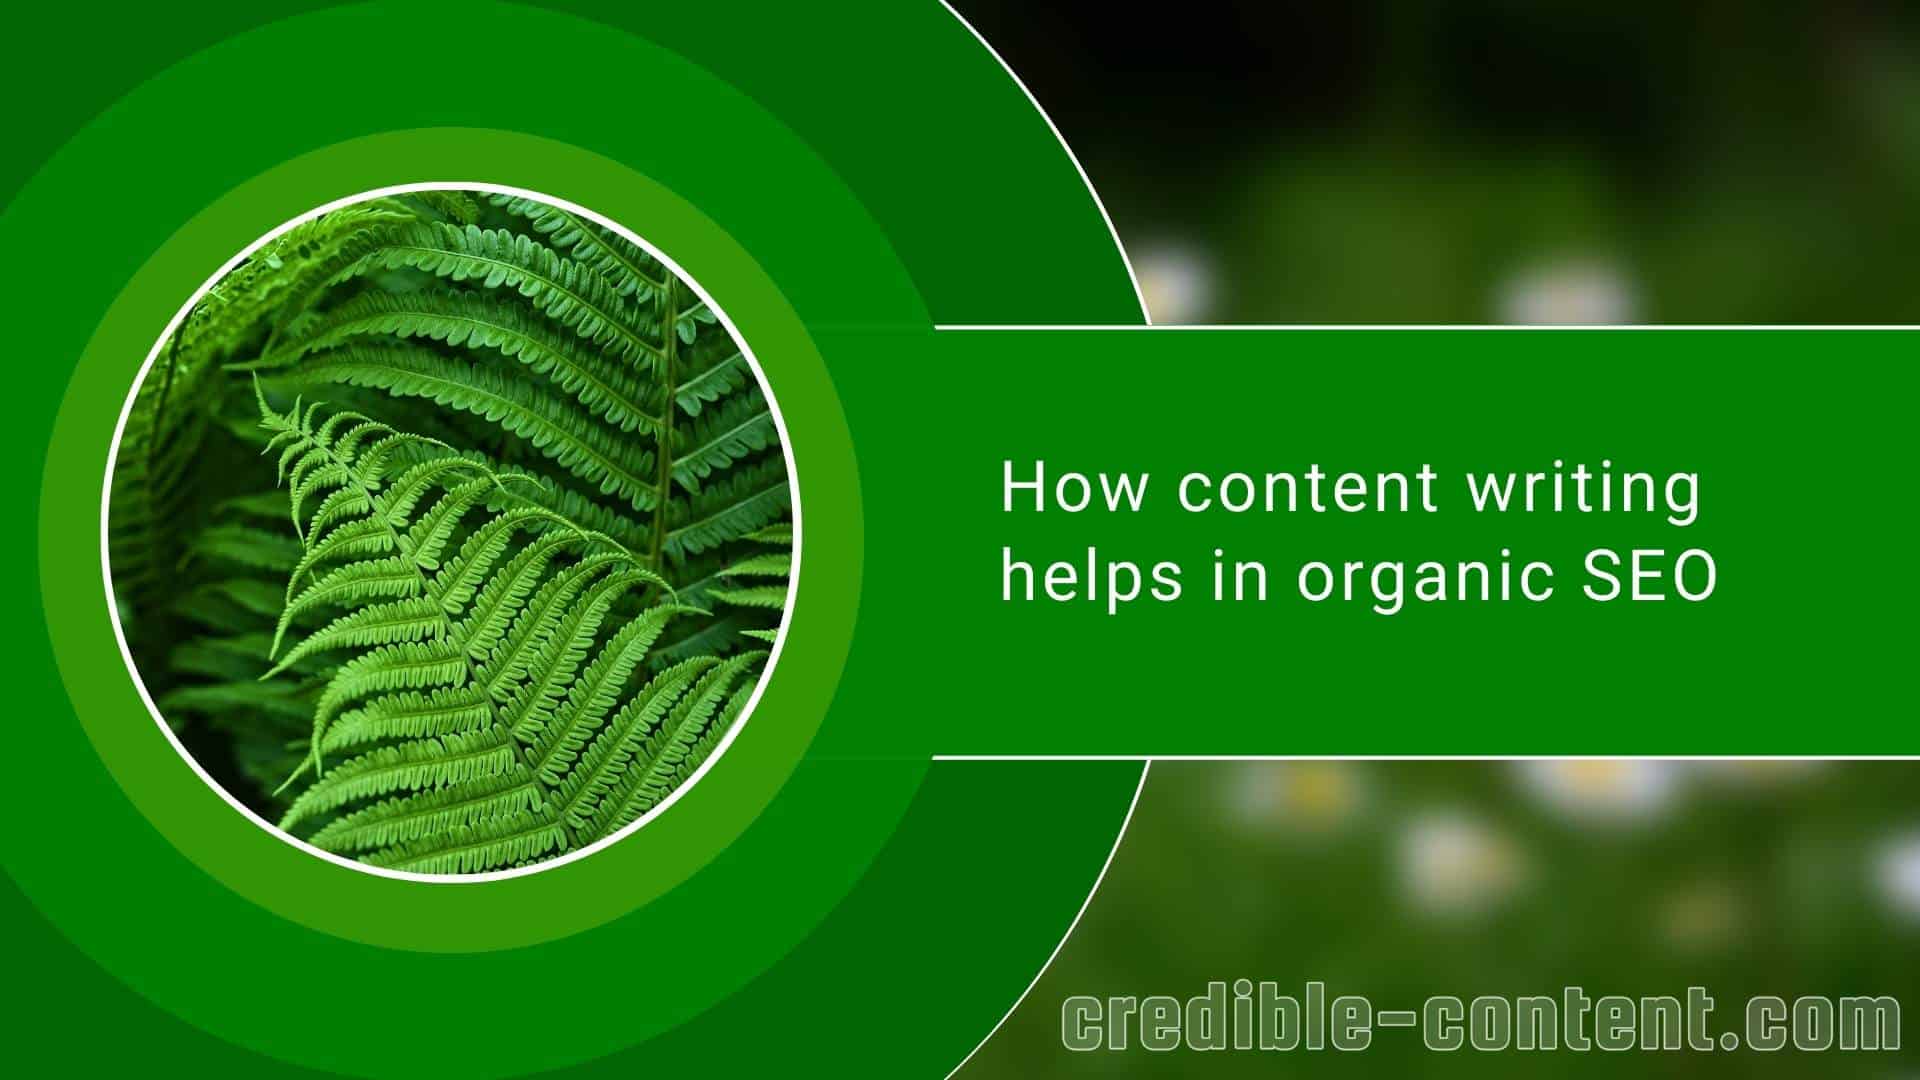 How content writing helps in organic SEO